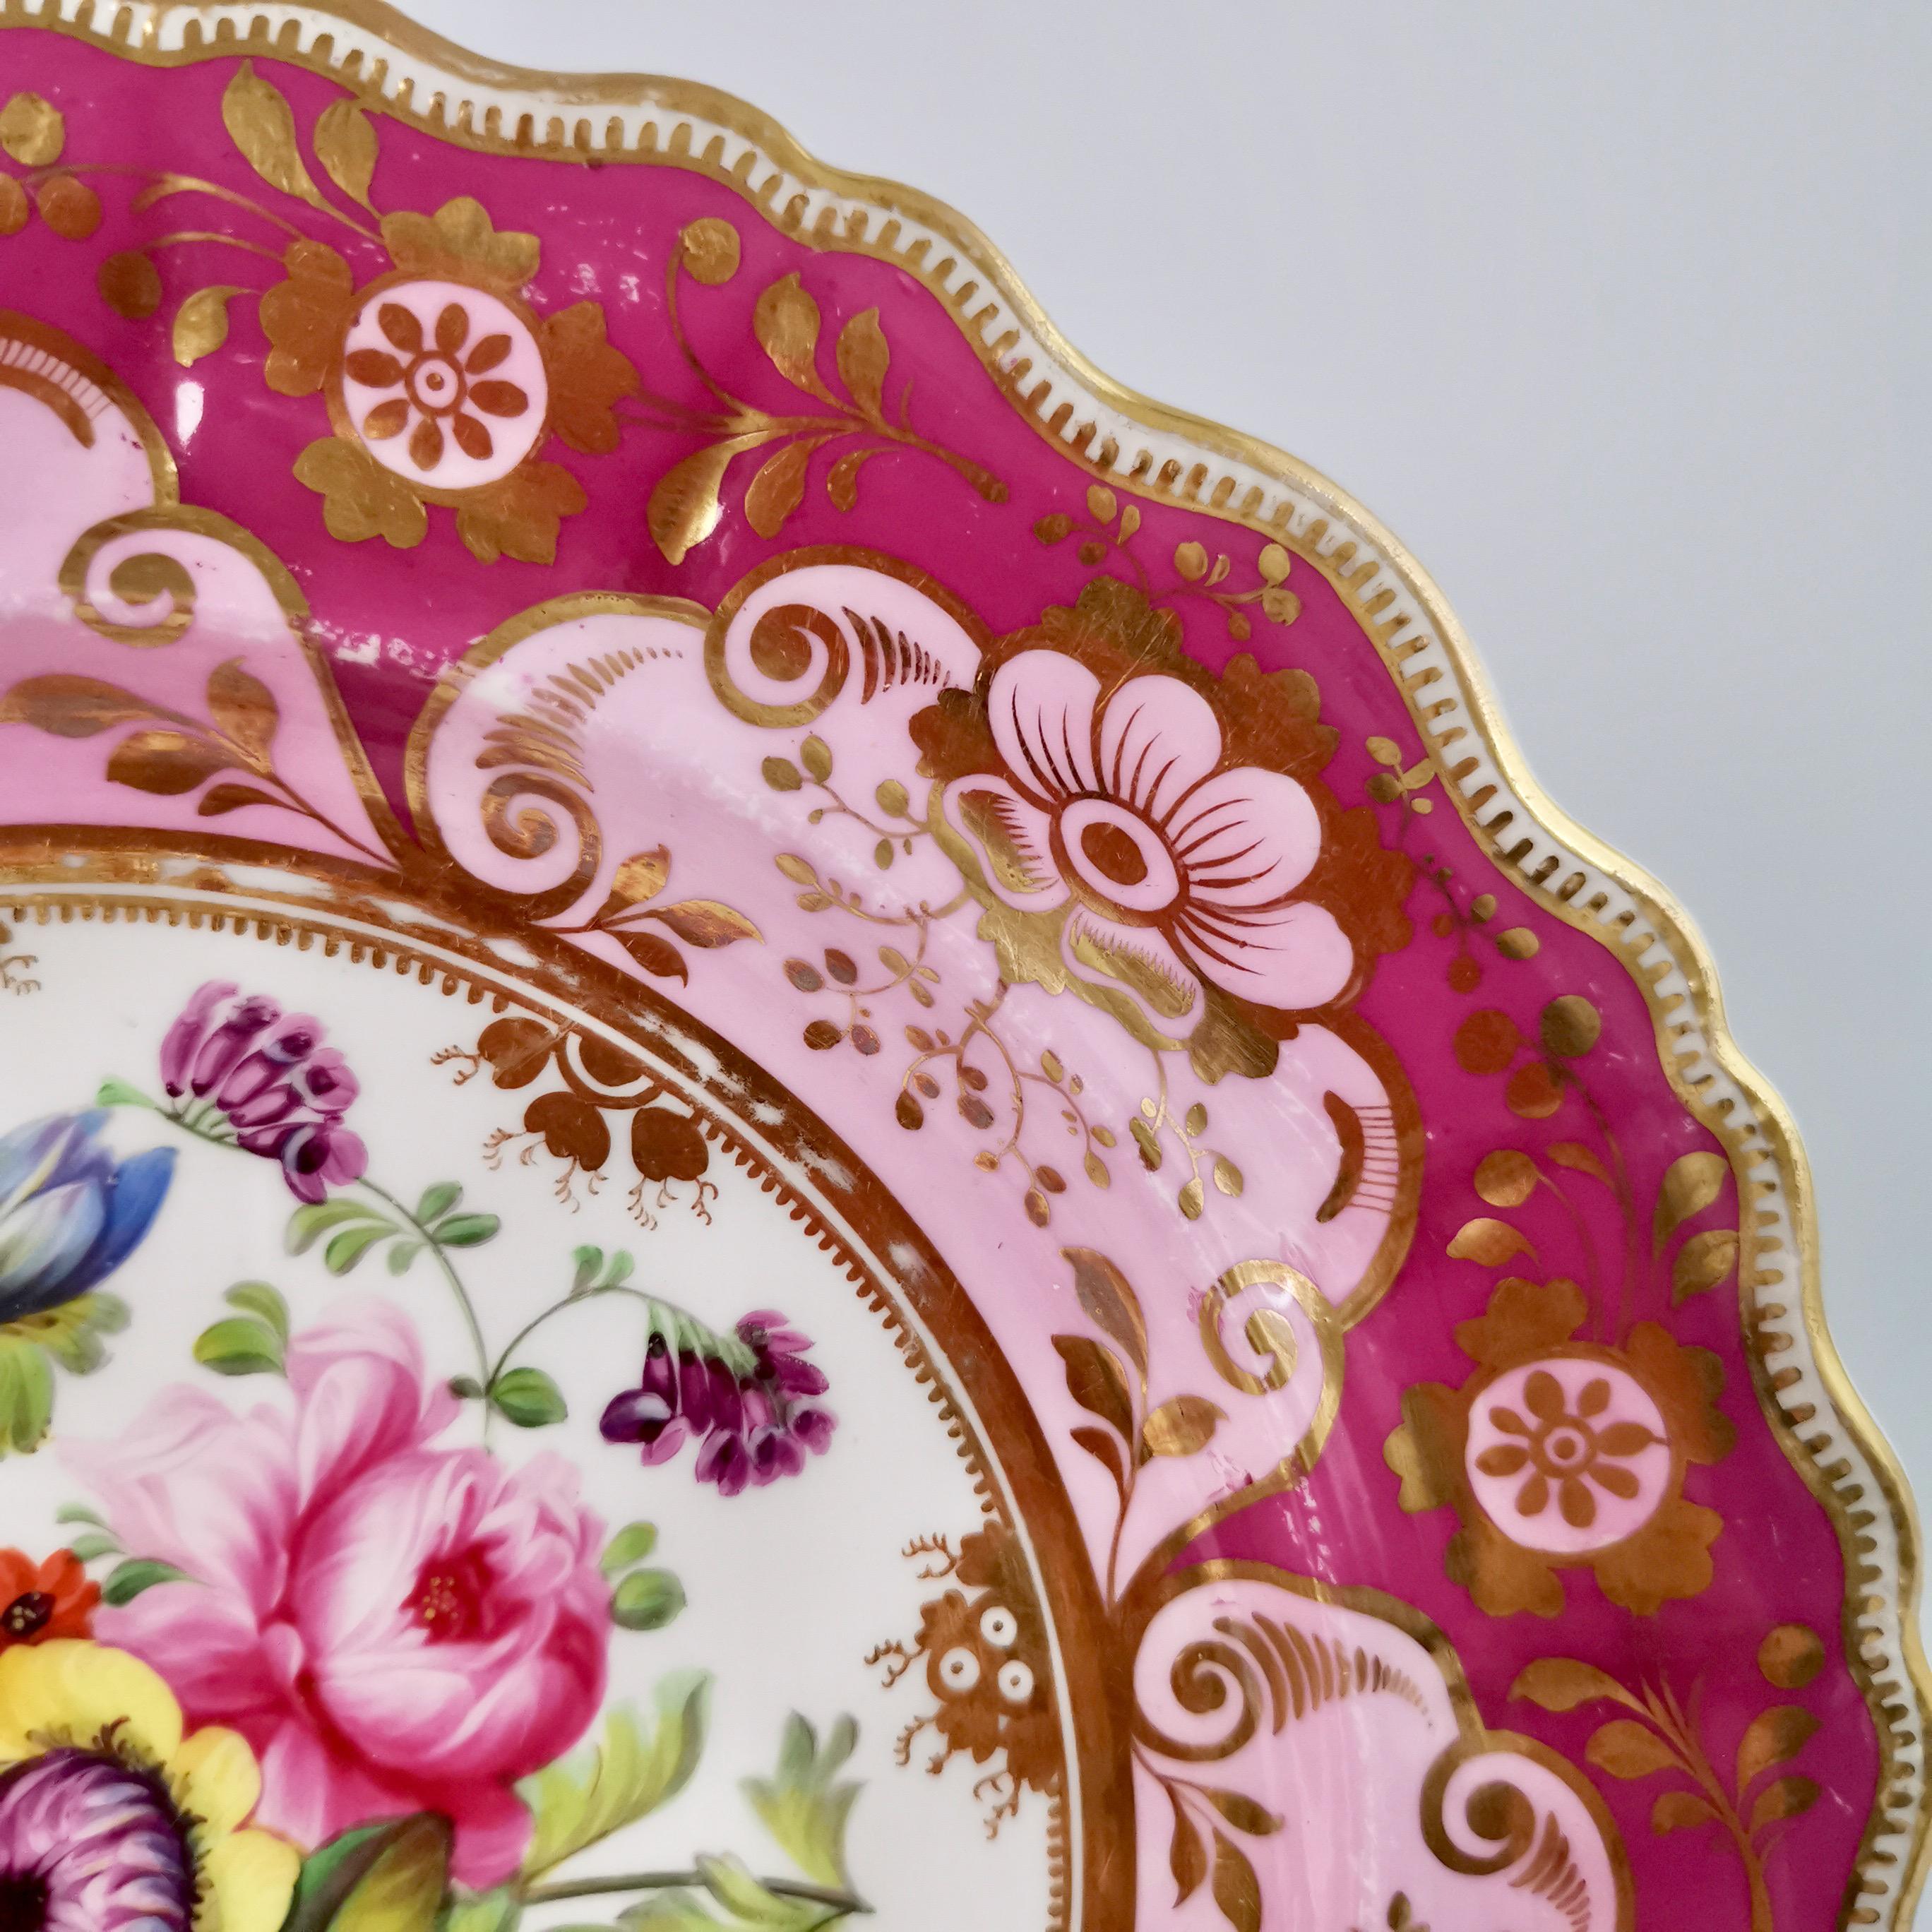 Ridgway Porcelain Plate, Mauve, Pink and Flowers, Regency, ca 1829 1